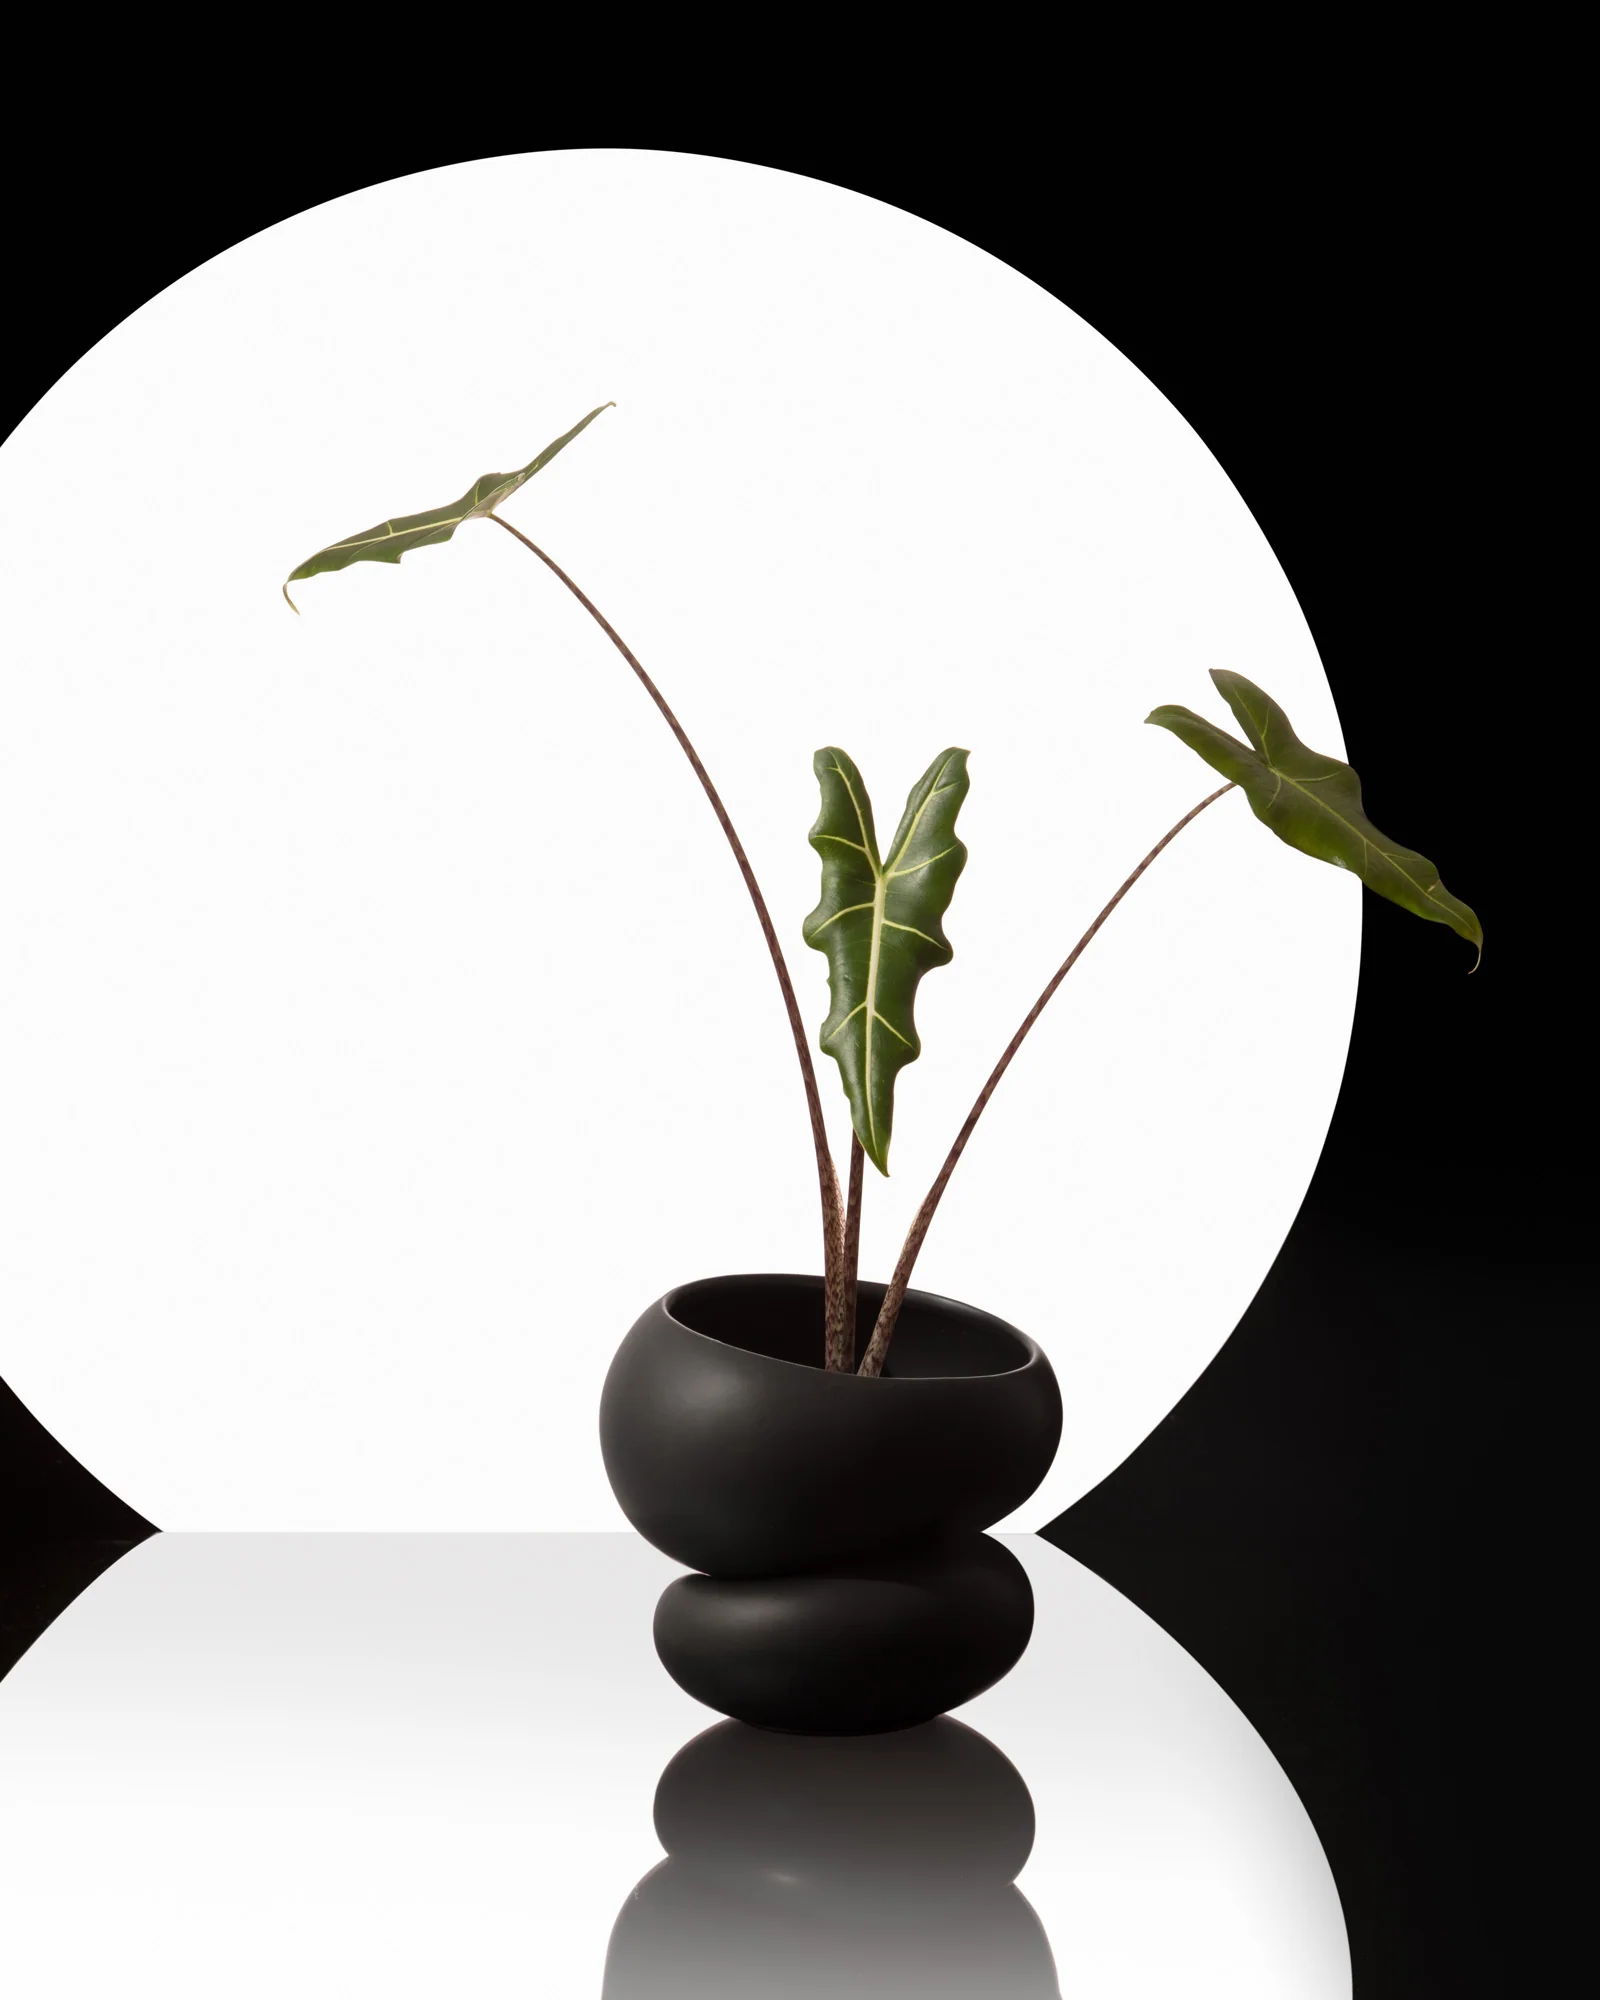 A two-tiered, round black planter with a three-leaved plant sitting on top of a mirrored surface